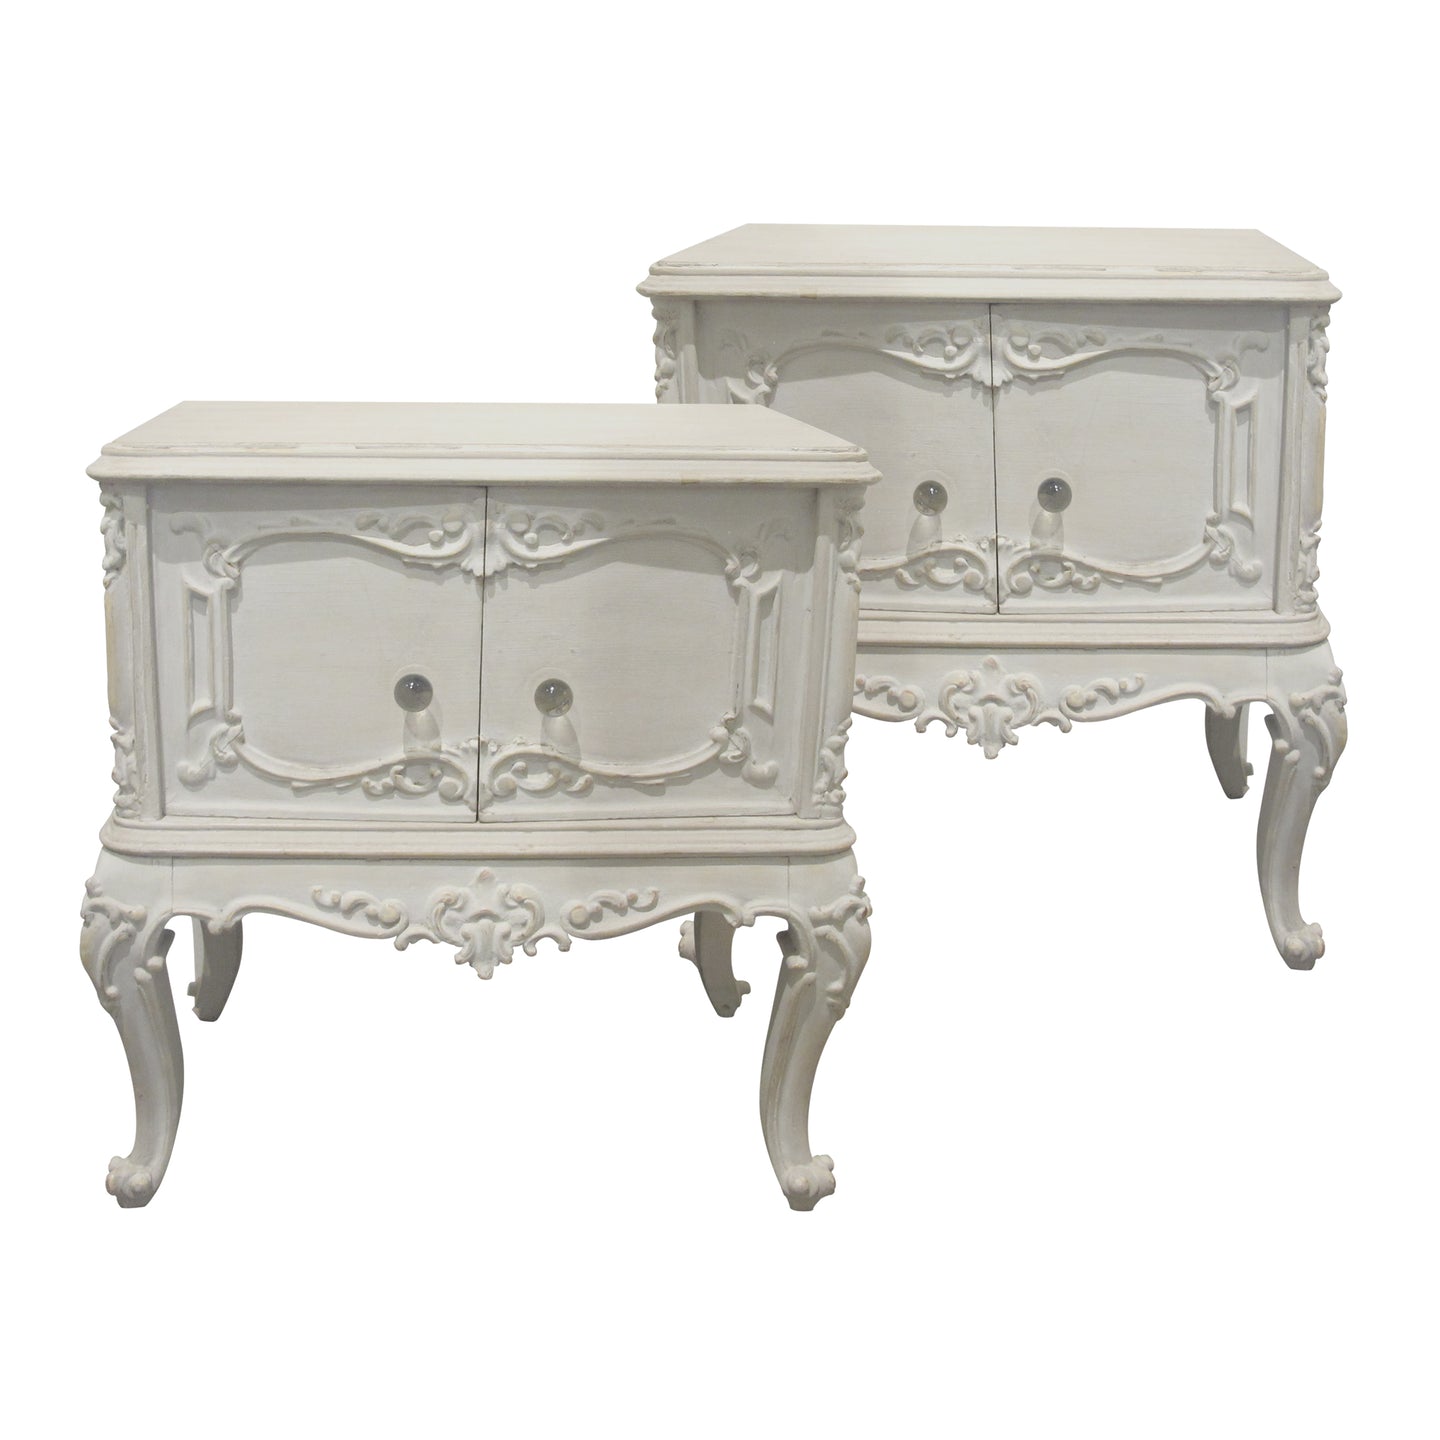 Pair of Painted Bedside Tables – Nightstands, Mid-Century French